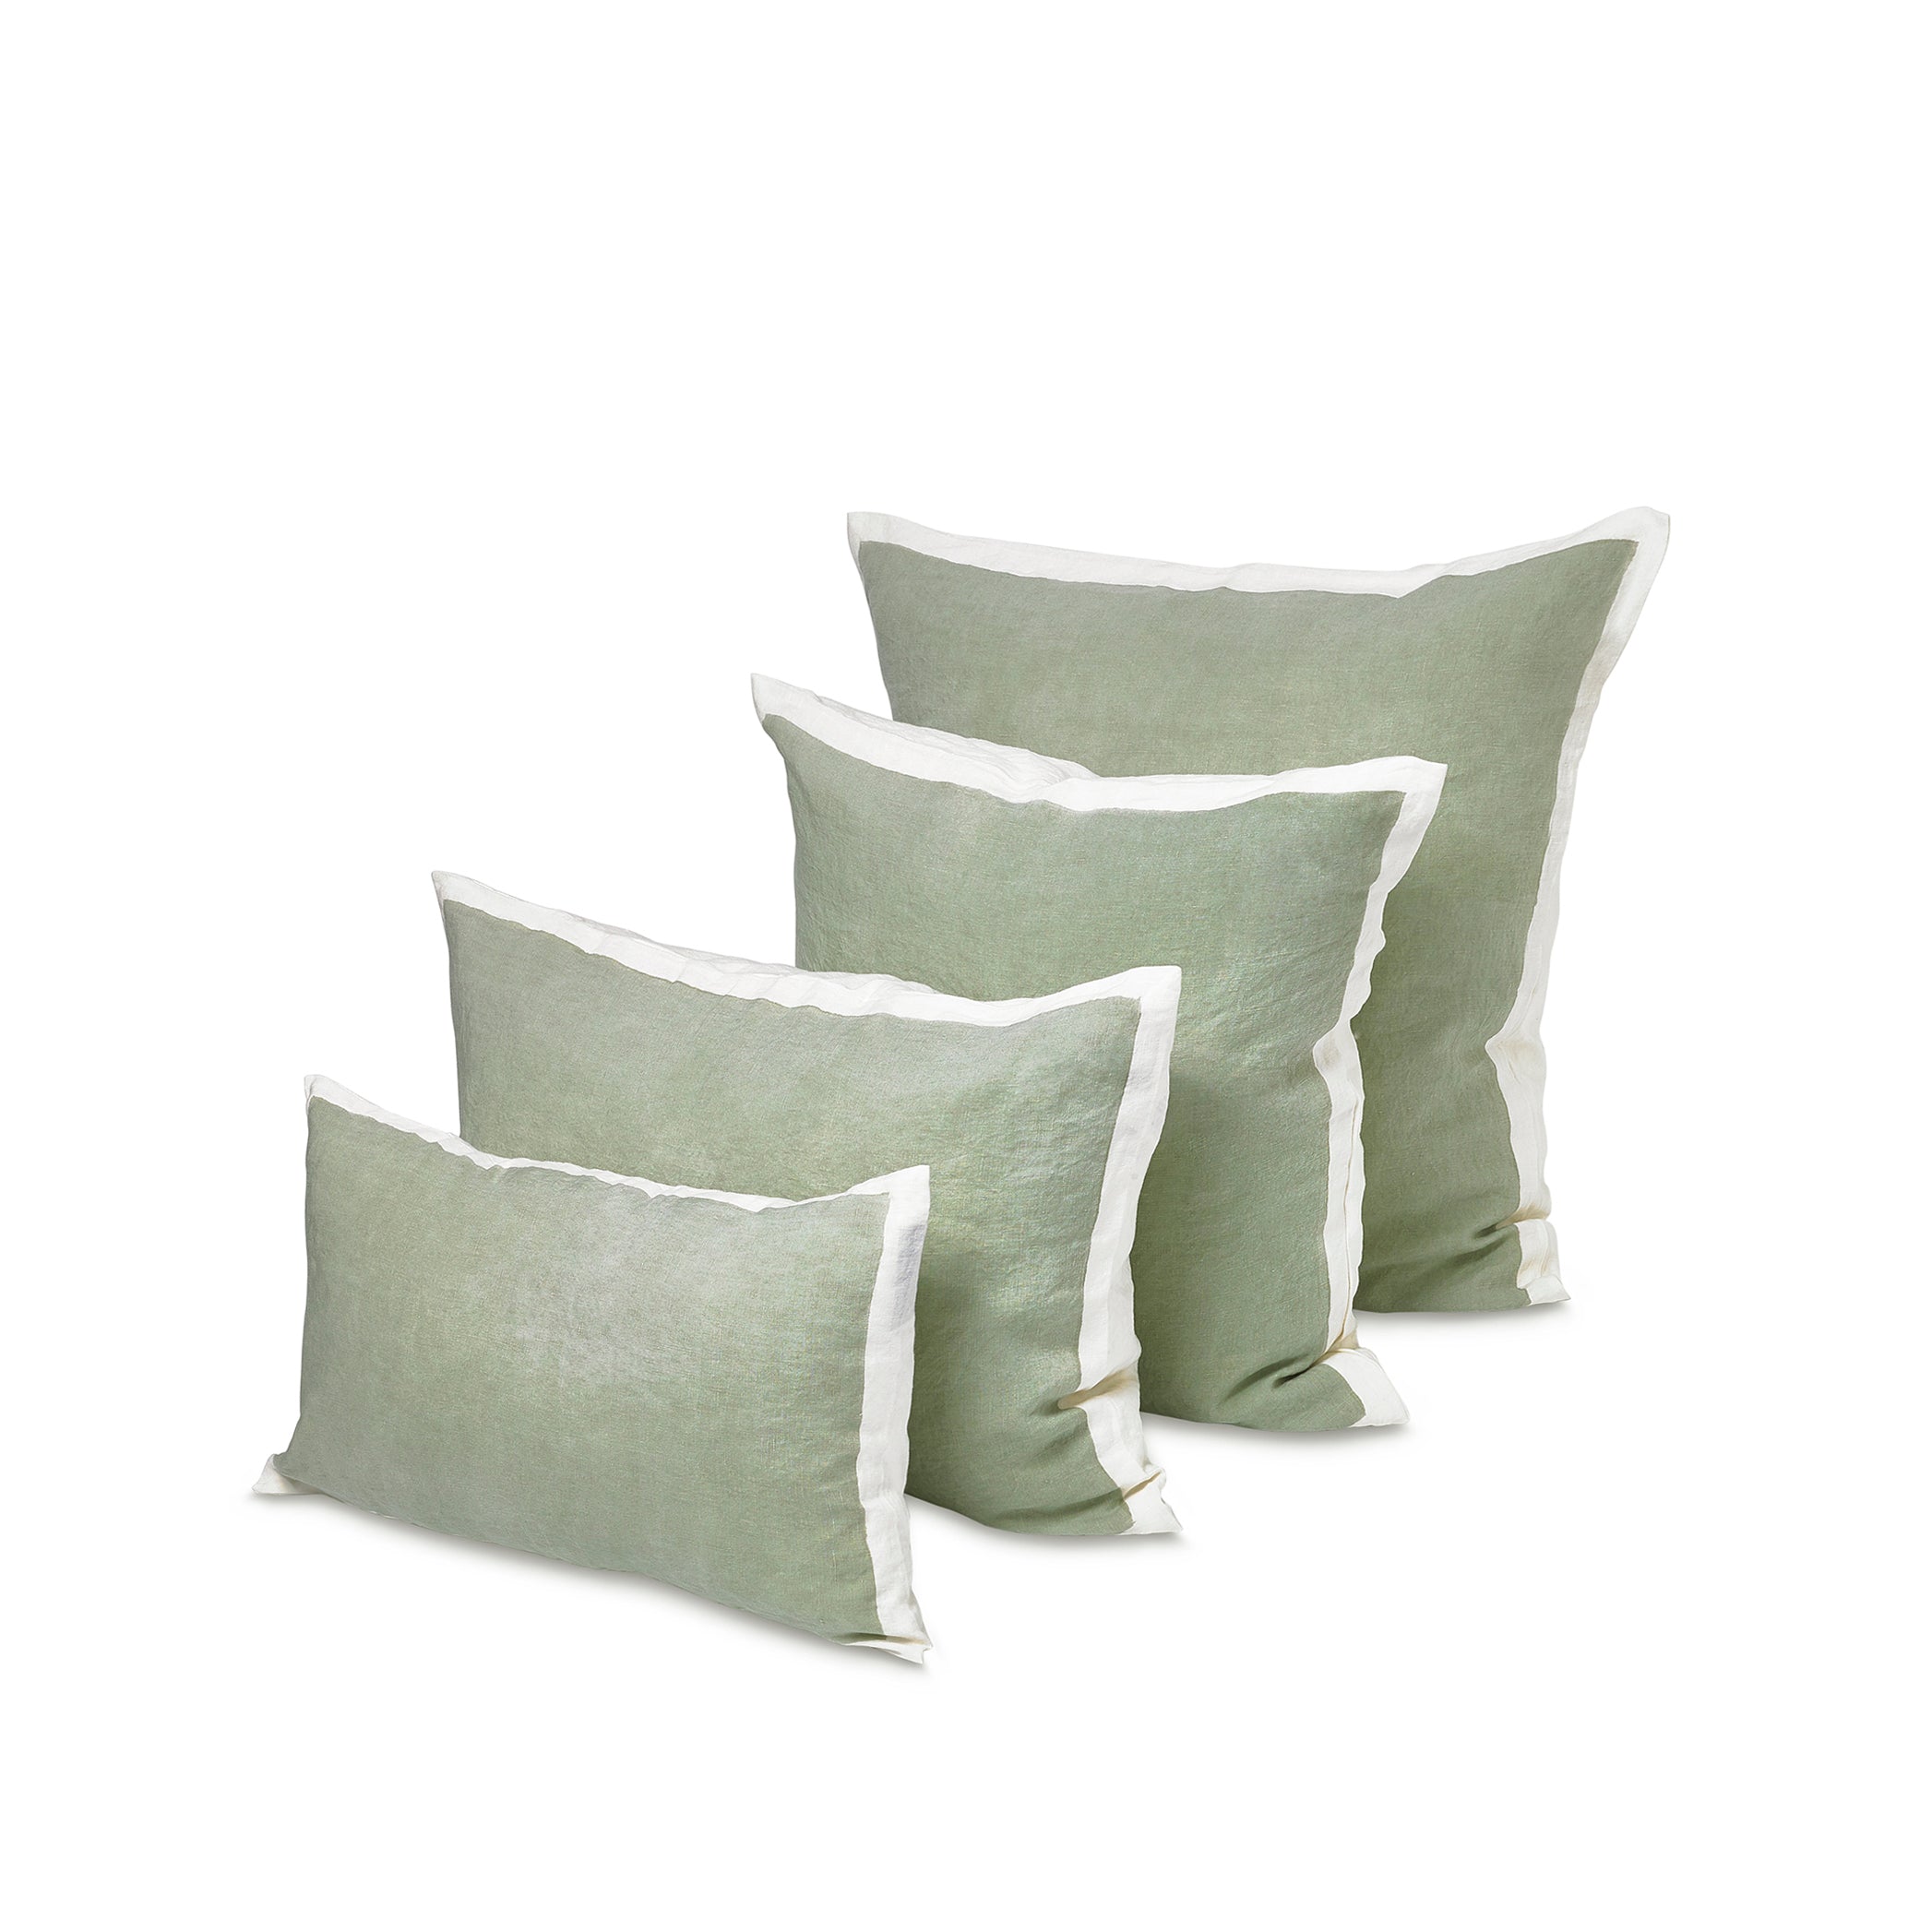 Hand Painted Linen Cushion in Pale Green, 50cm x 30cm